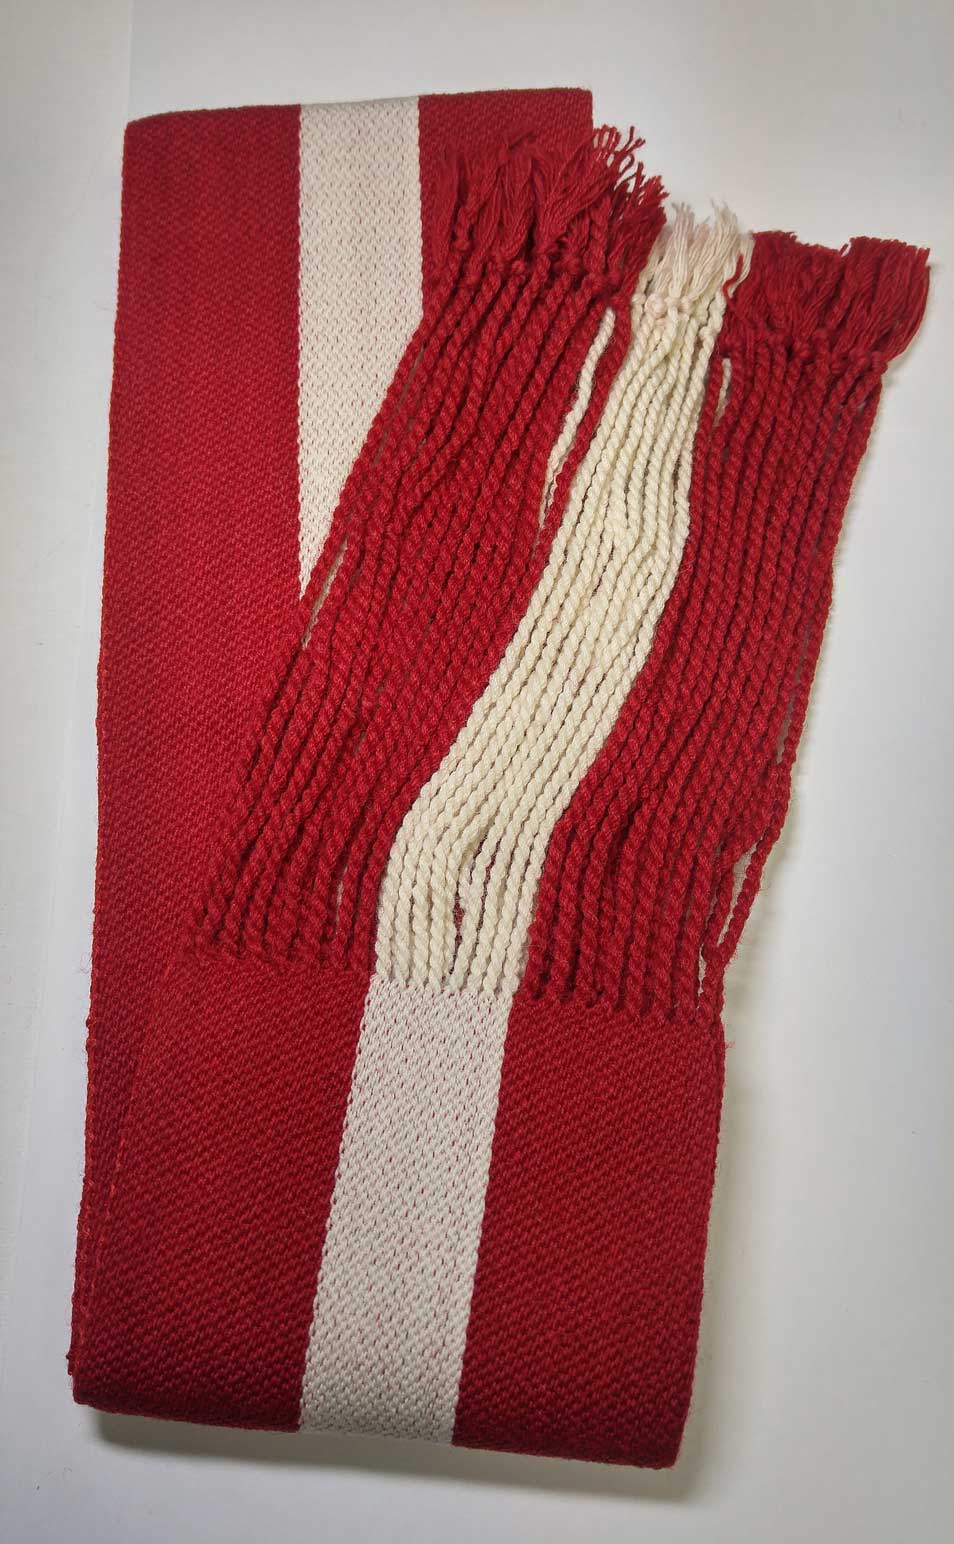 Sash: Sgt., Red with White Stripe, 18/19C